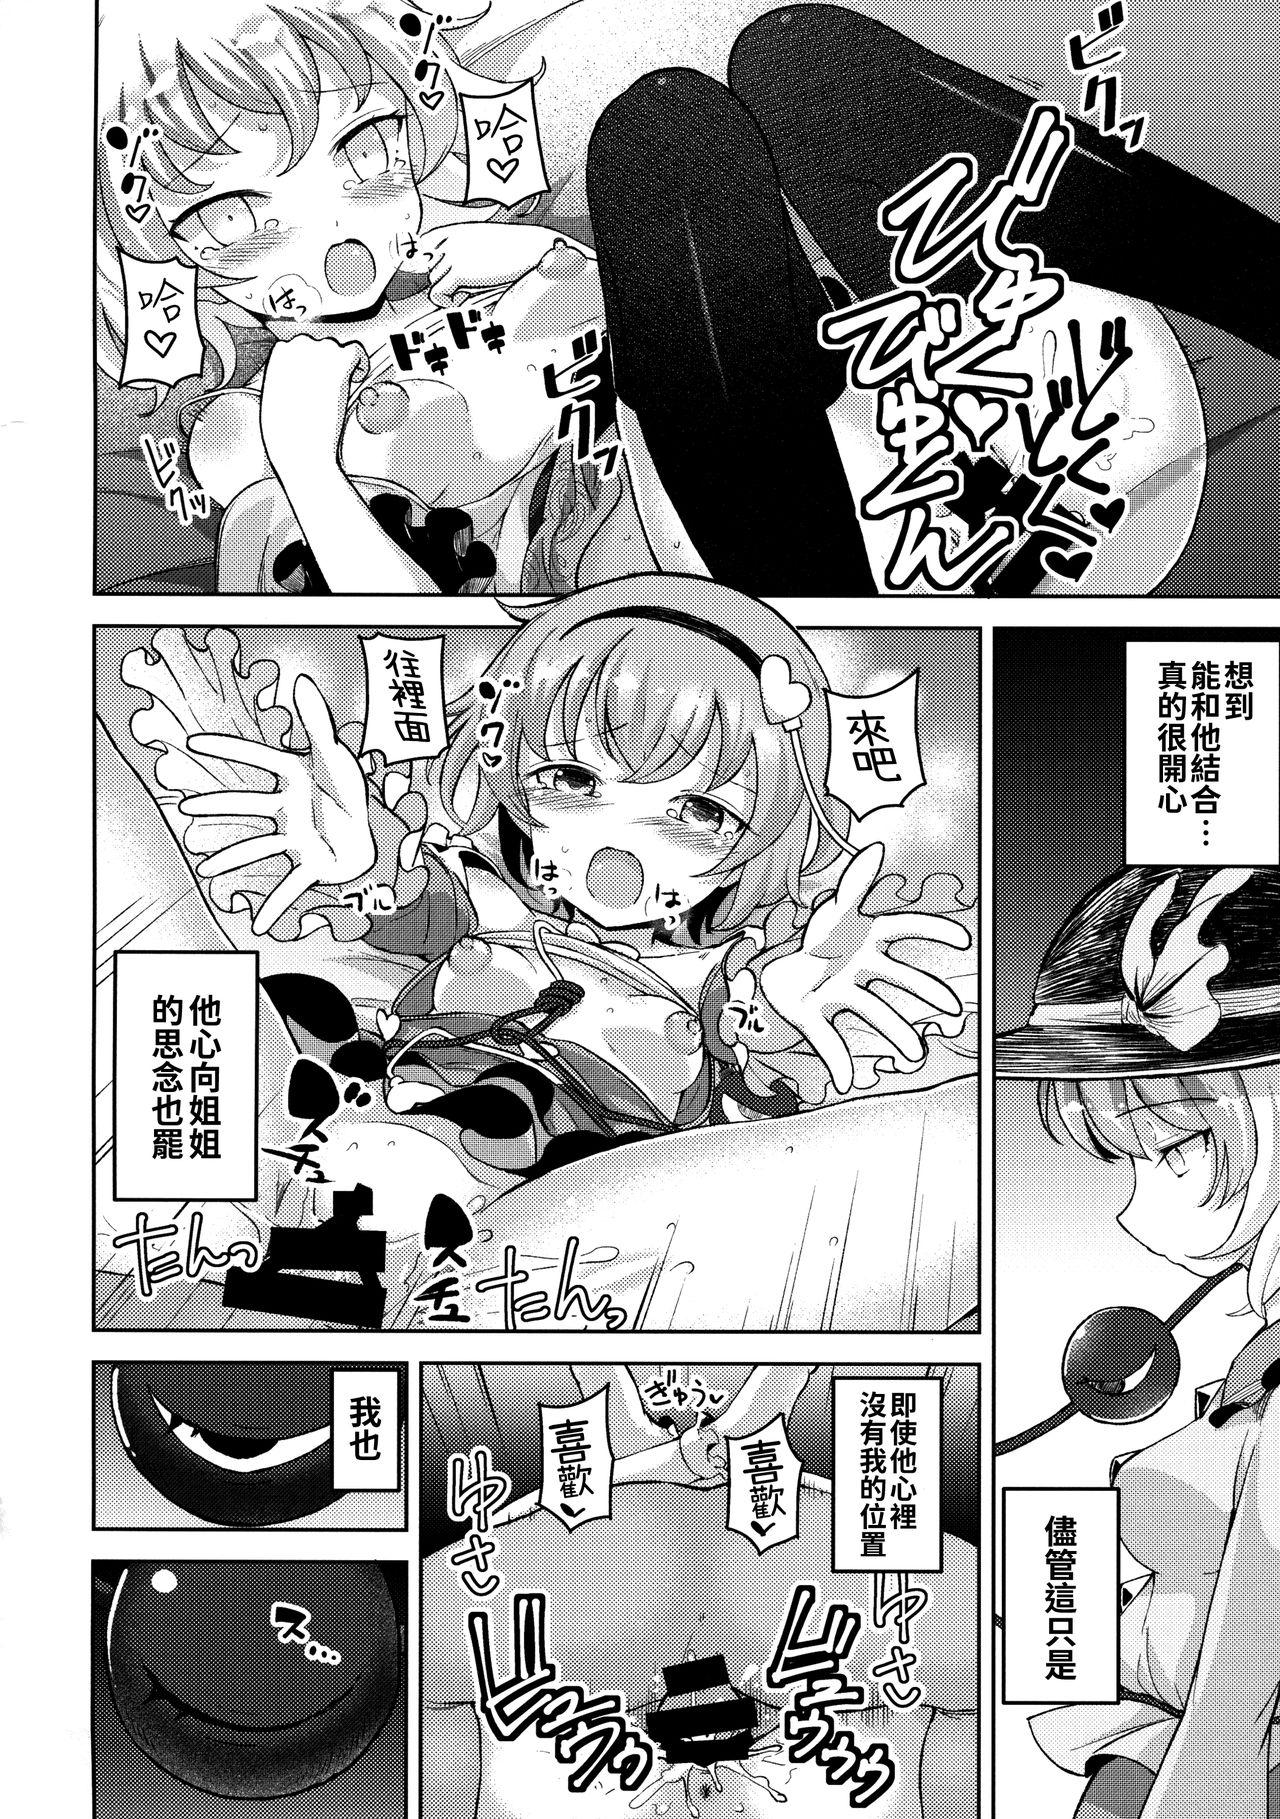 Cream Aisare Chireiden - Touhou project Style - Page 6